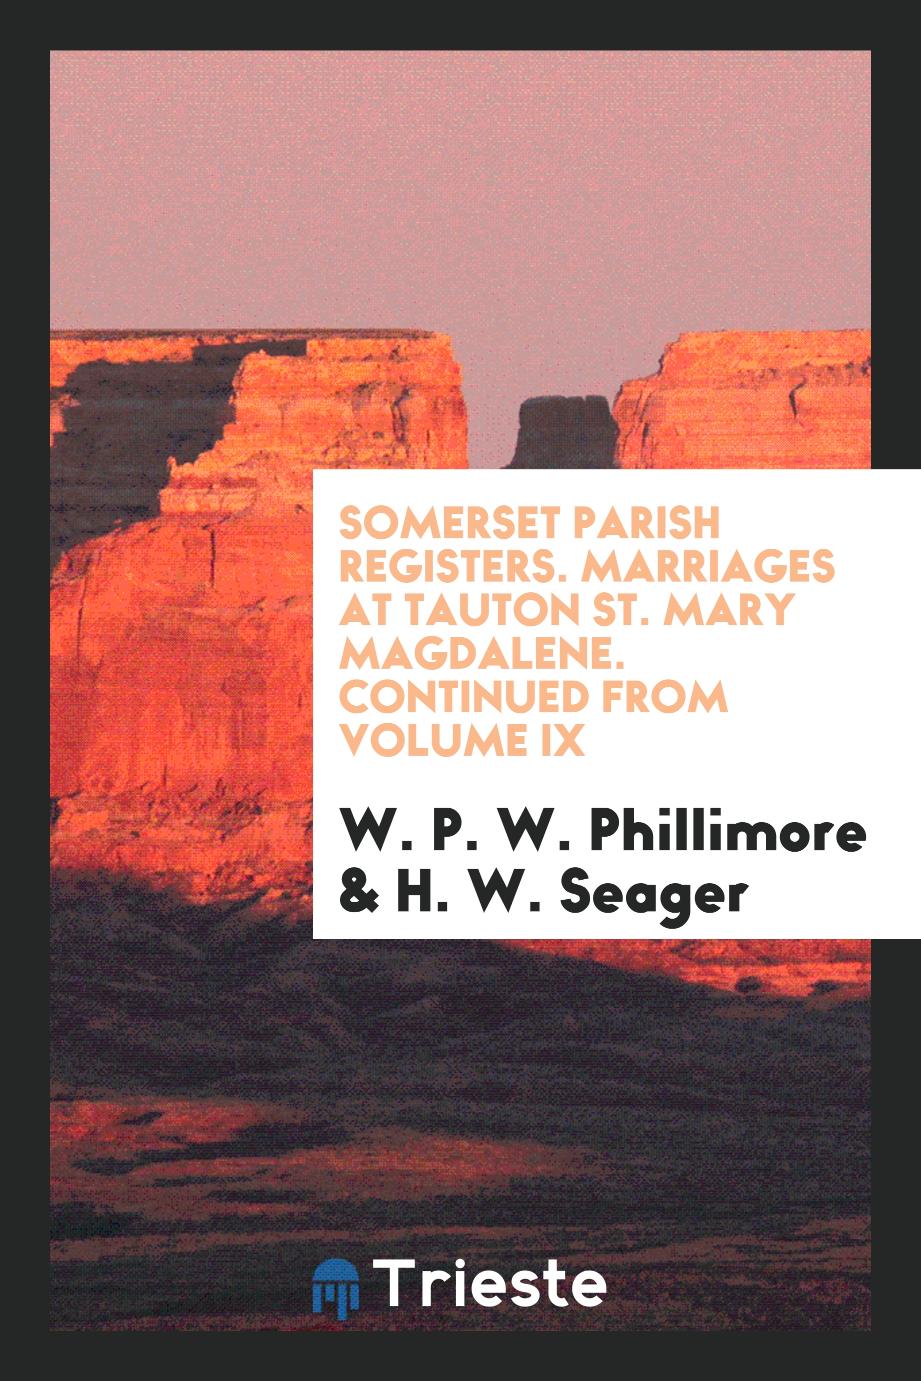 Somerset parish registers. Marriages at Tauton St. Mary Magdalene. Continued from Volume IX